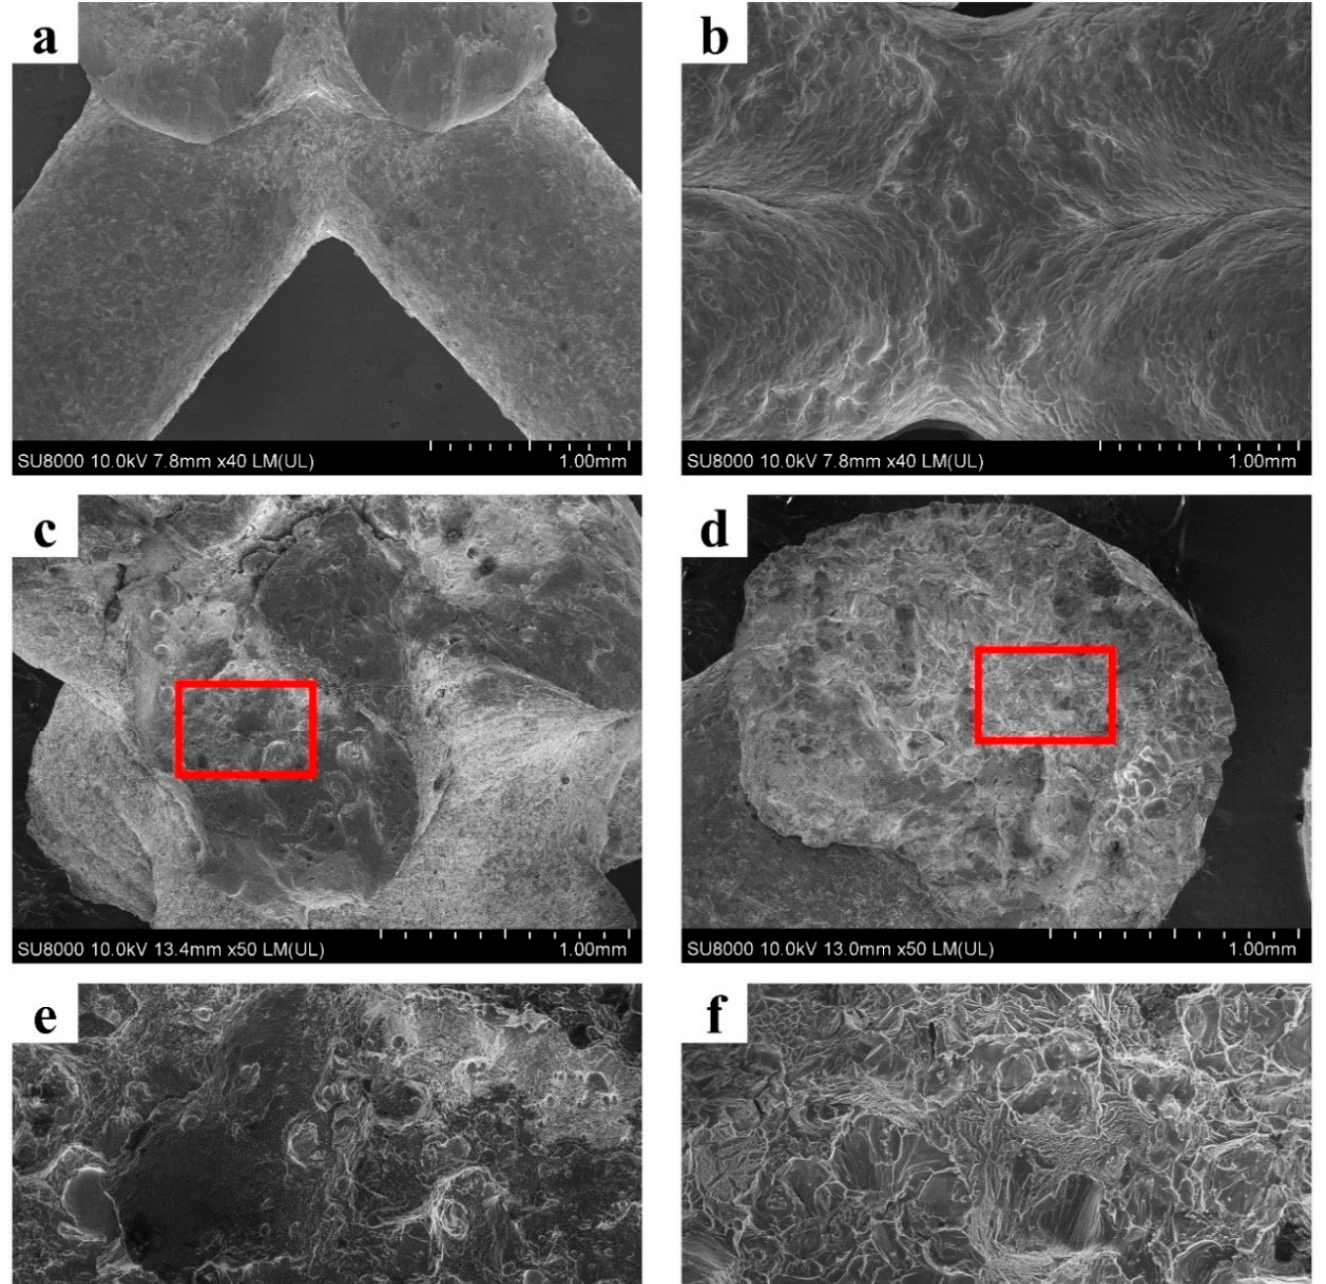 The strut surface morphology of (a) AM AlSi10Mg and (b) as-cast 7005 Al alloy lattice structures; (c,d) are the morphology of fracture surface of AM AlSi10Mg and as-cast 7005 Al alloy lattice structures; (e,f) magnified microstructures in the red frames of (c,d).